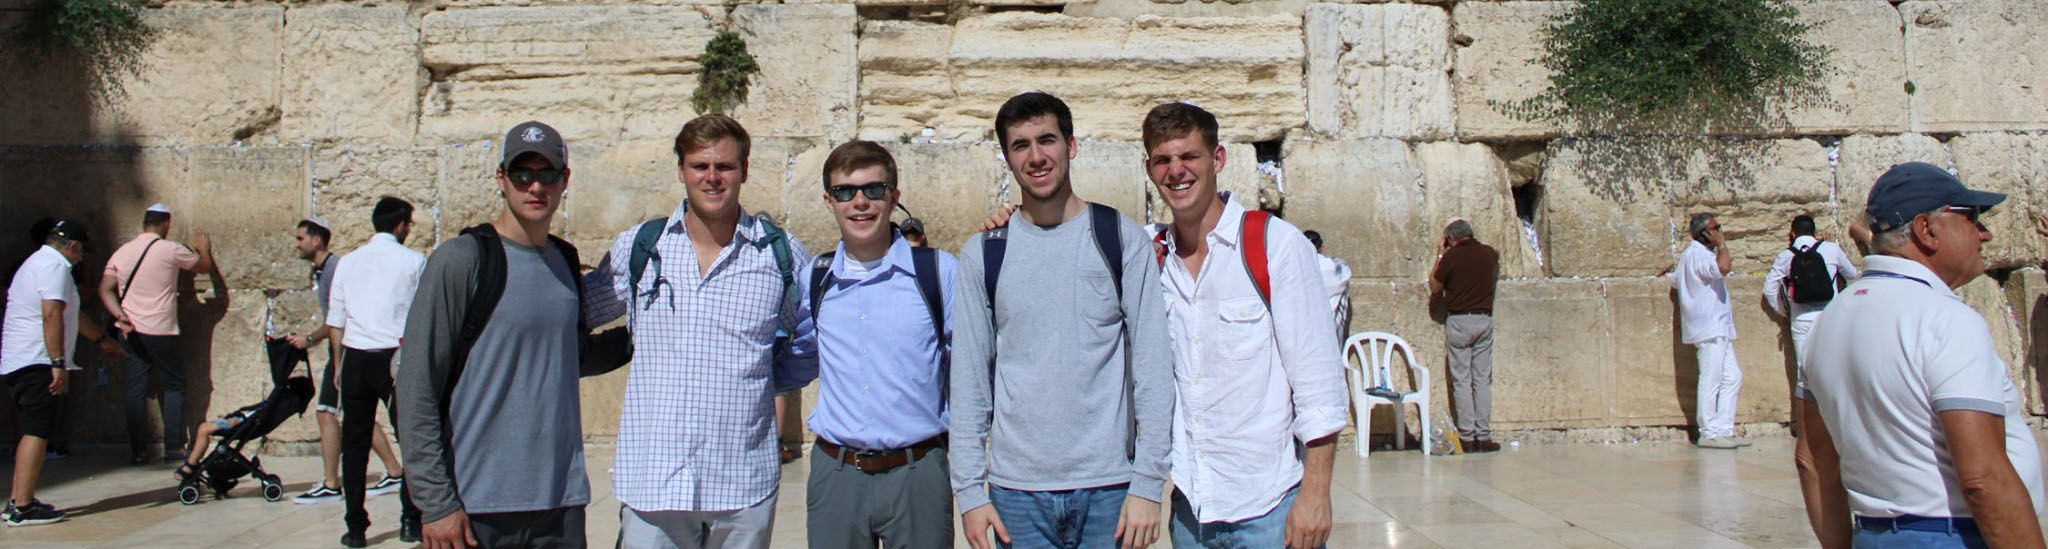 Students in Jerusalem as part of a study abroad experience